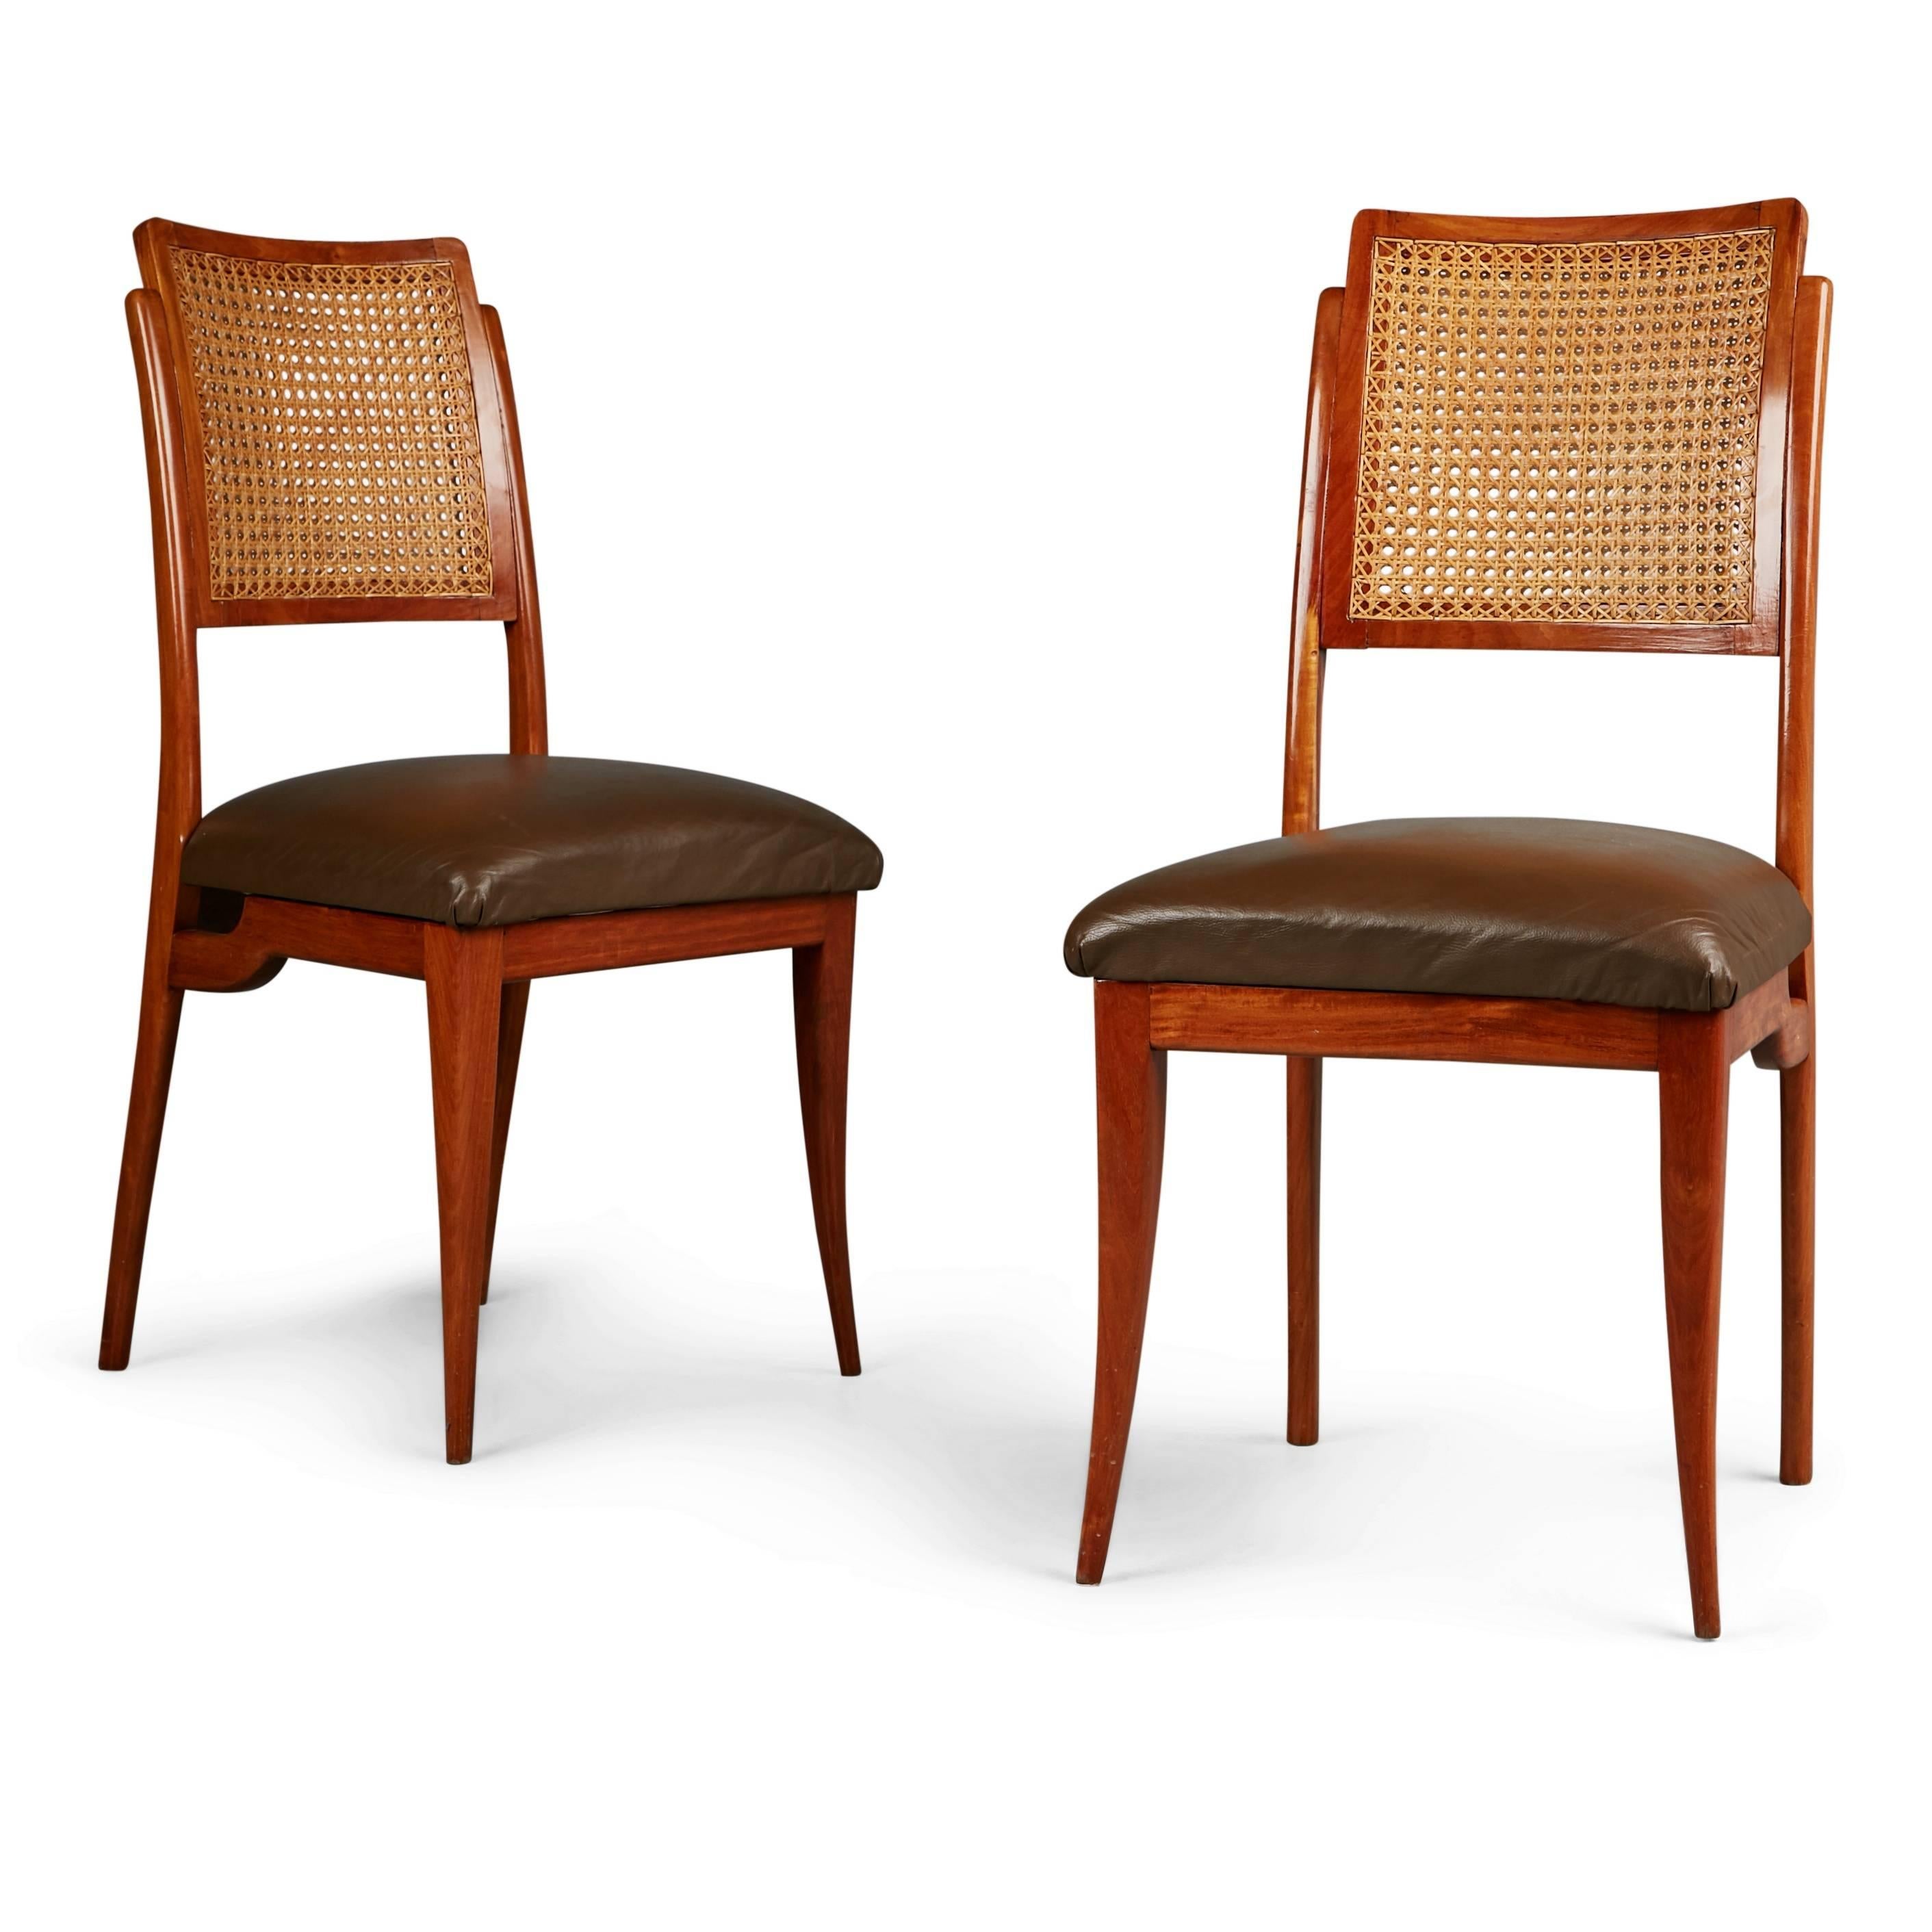 Newly imported from a private collector in Brazil, these extraordinary dining chairs embody the use of curvaceous lines and soft shapes that Scapinelli was well-known for. These sculptural dining chairs have been recently lacquered and are